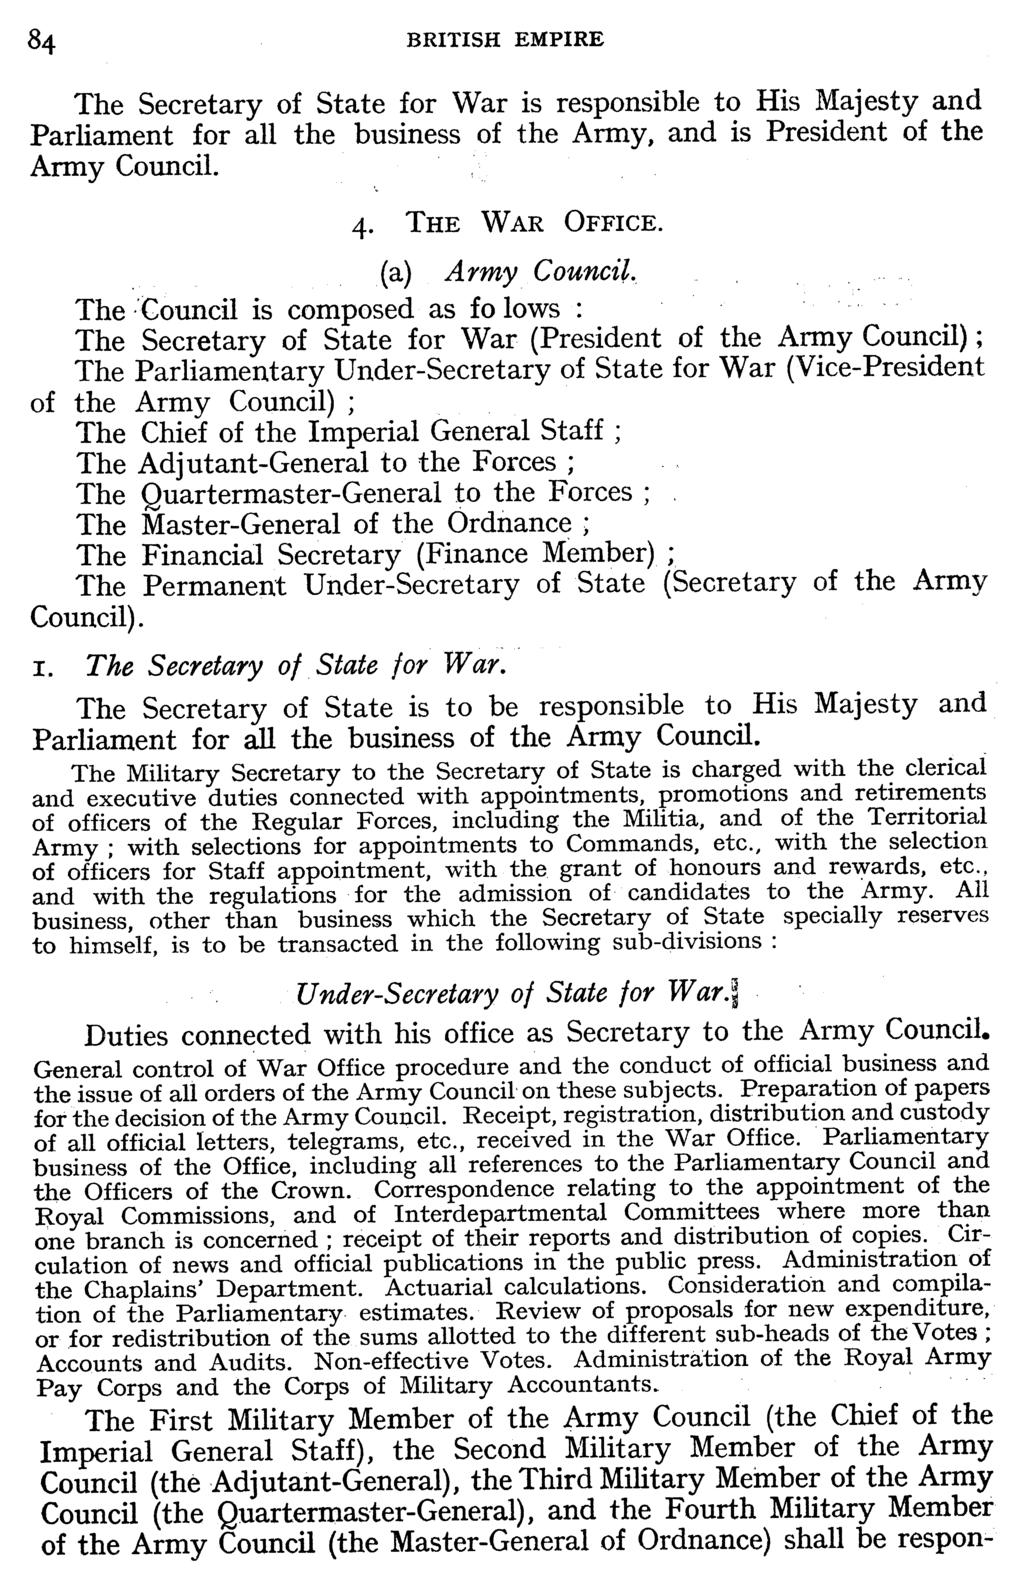 84 BRITISH EMPIRE The Secretary of State for War is responsible to His Majesty and Parliament for all the business of the Army, and is President of the Army Council. 4. THE WAR OFFICE.